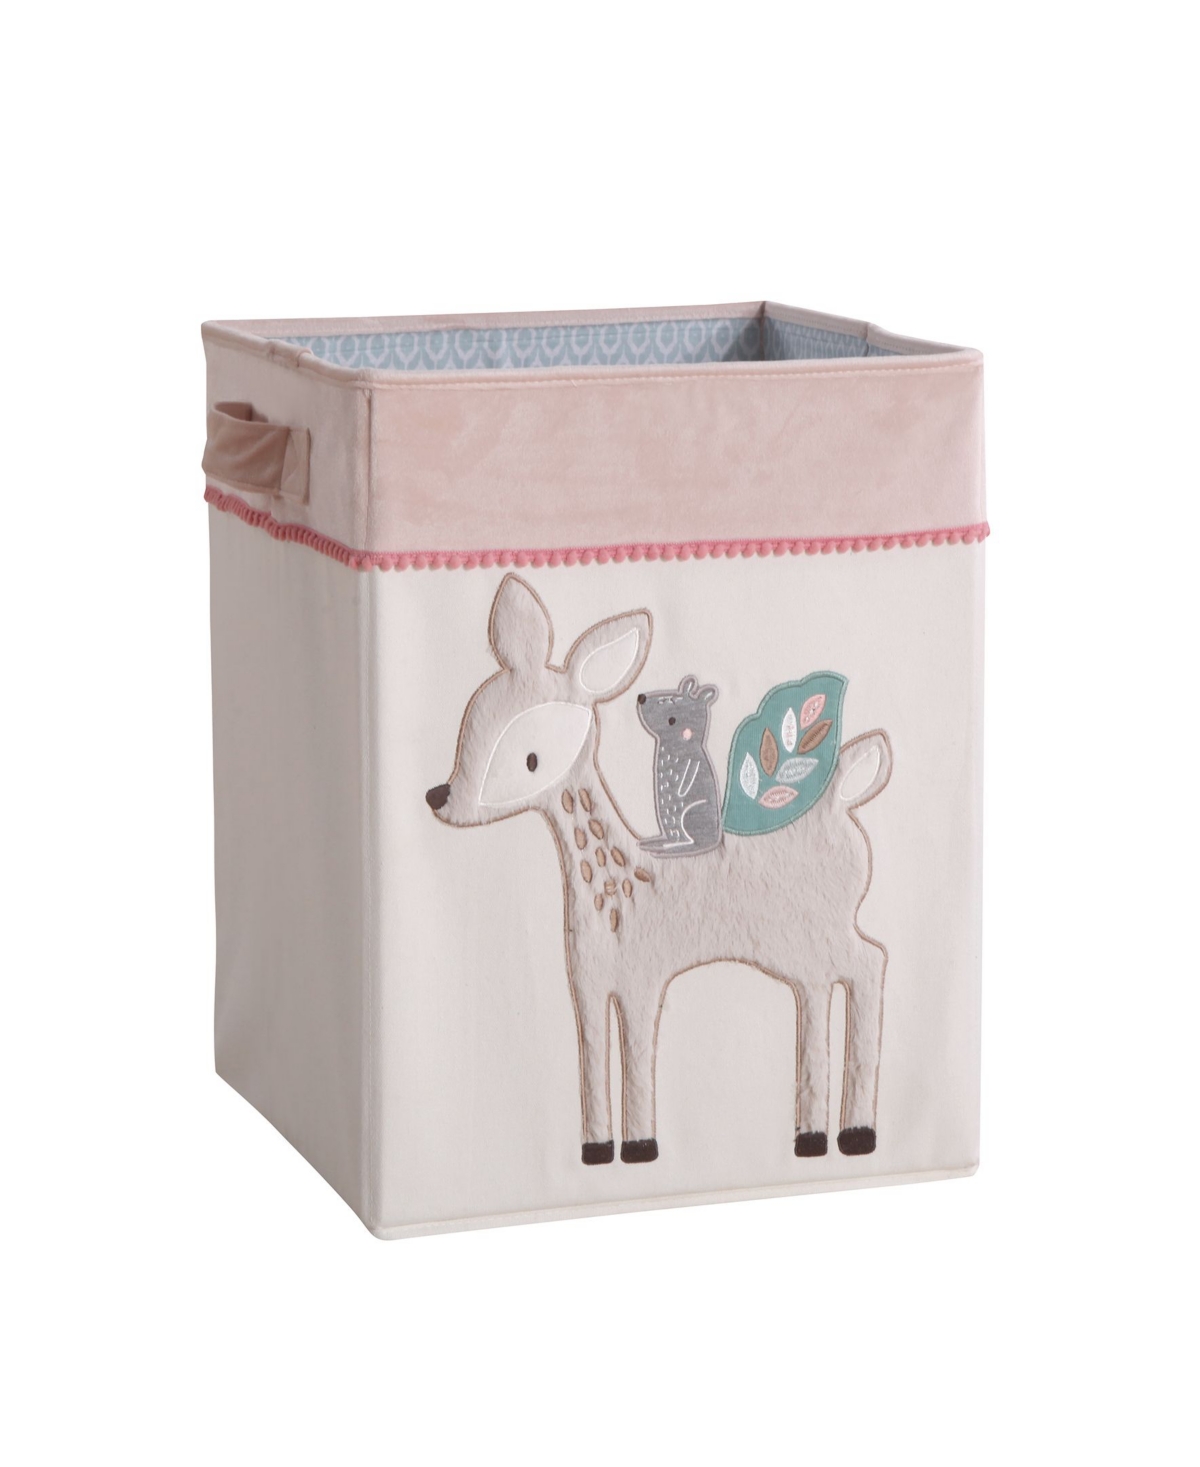 Levtex Baby Everly Square Hamper In Blush